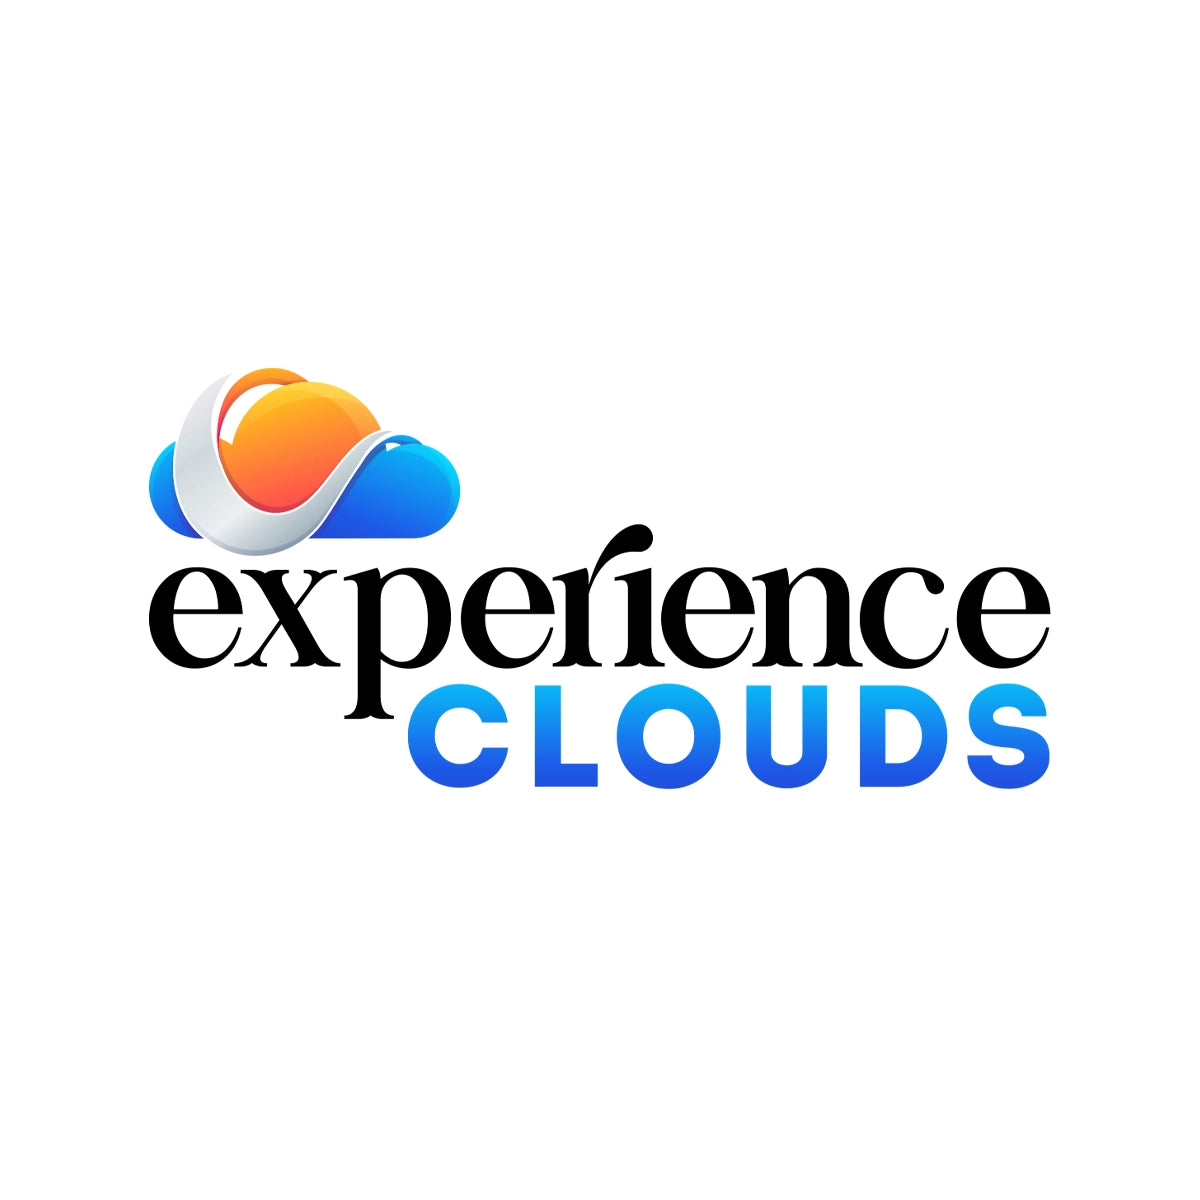 experienceclouds.com